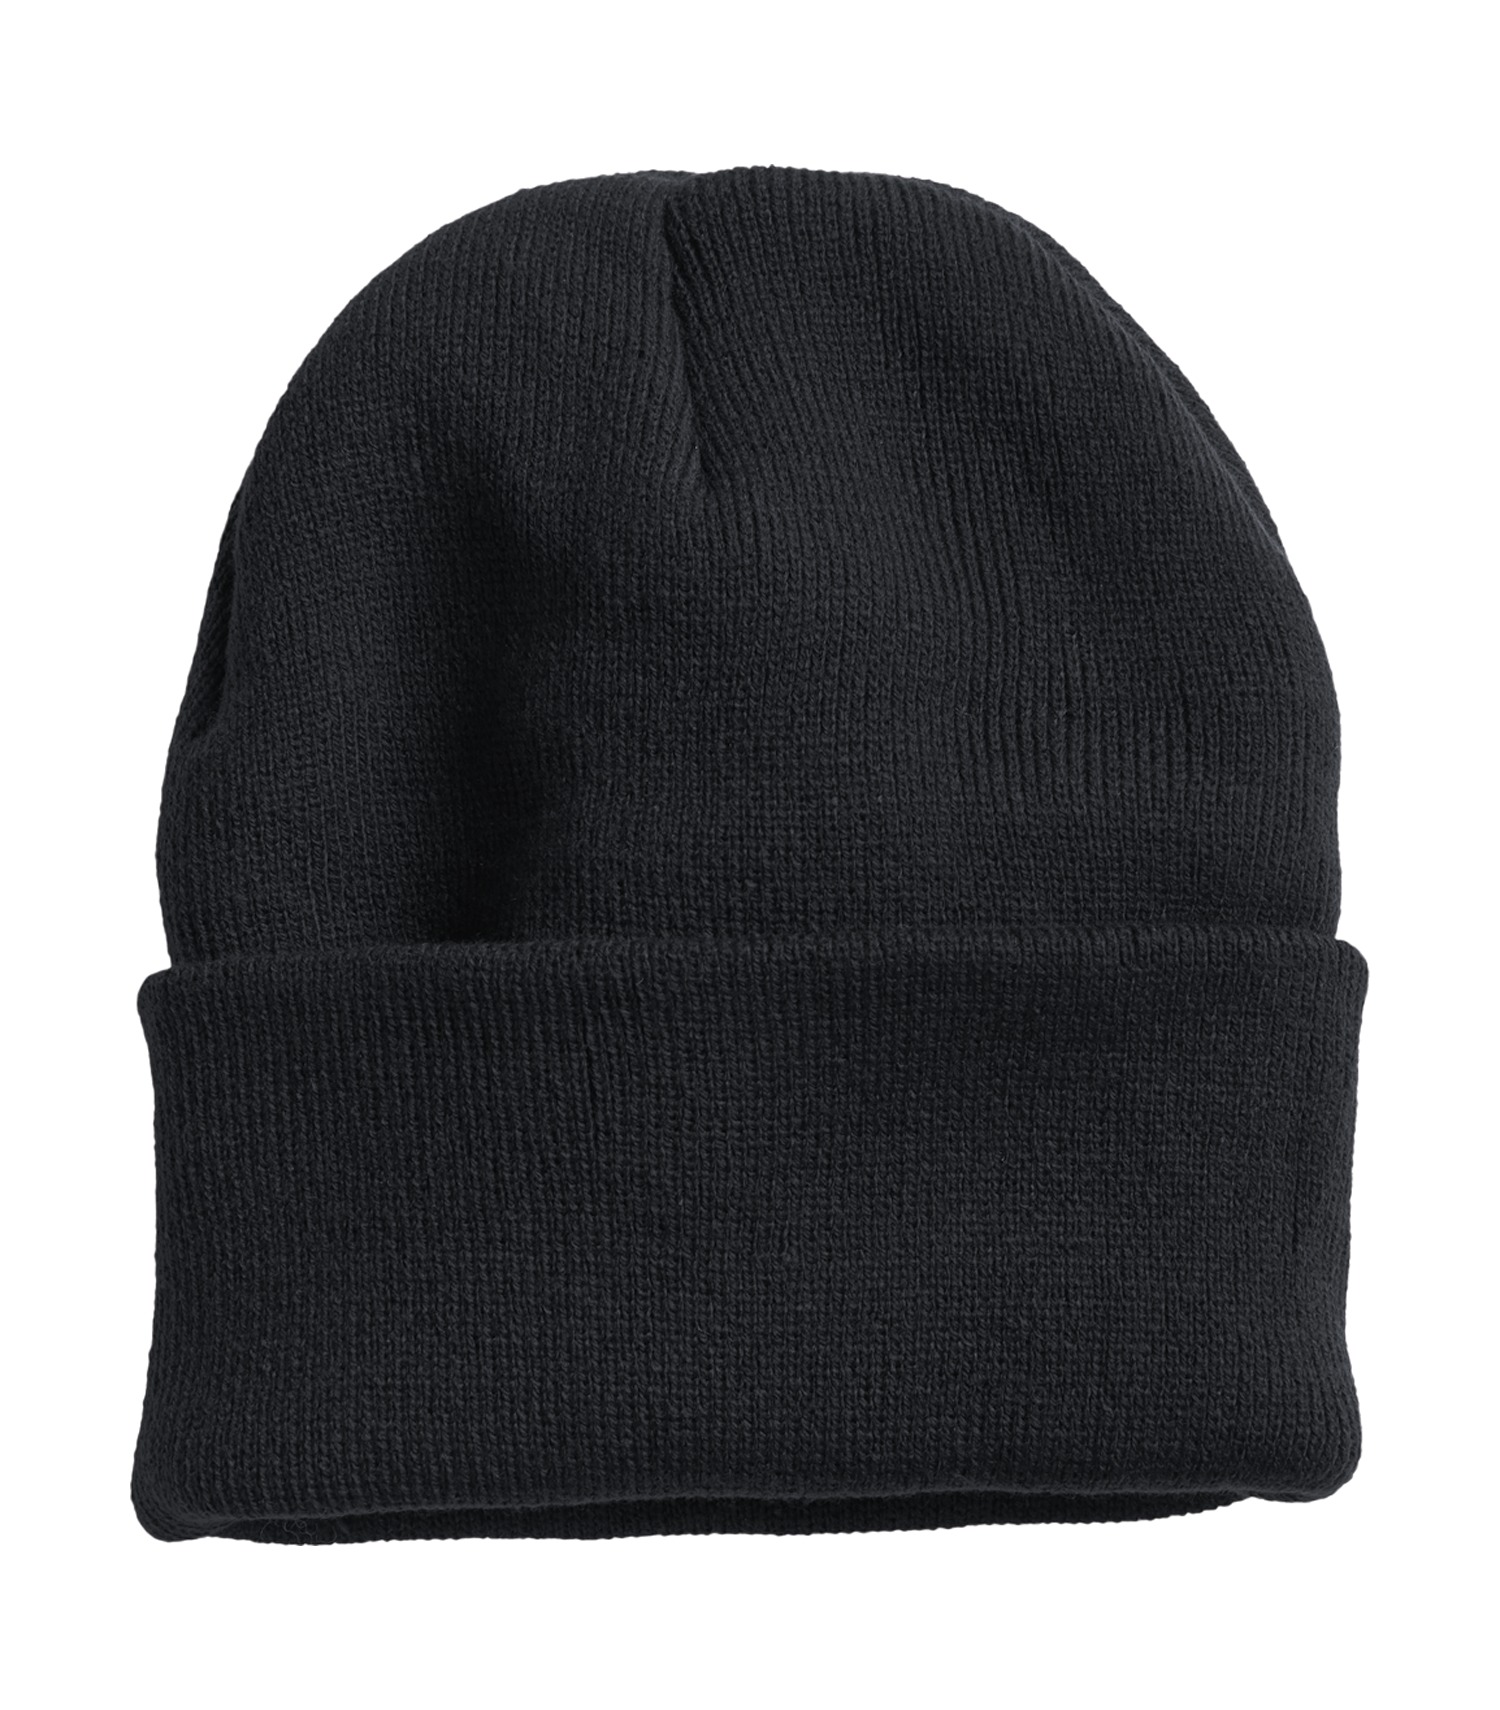 ATCTM INSULATED KNIT TOQUE – Jastex Constructions